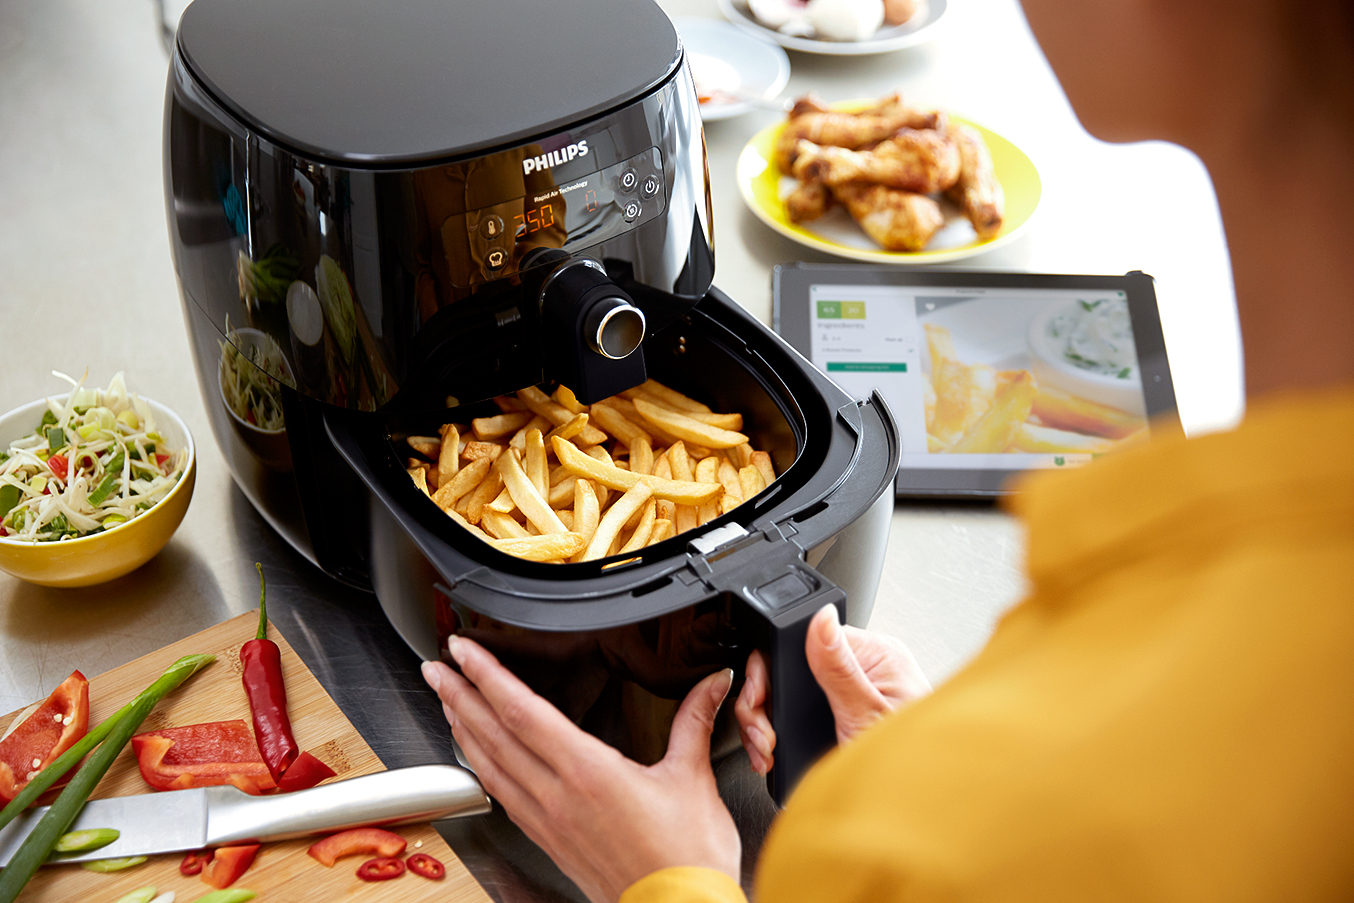 A Philips Airfryer filled with French fries